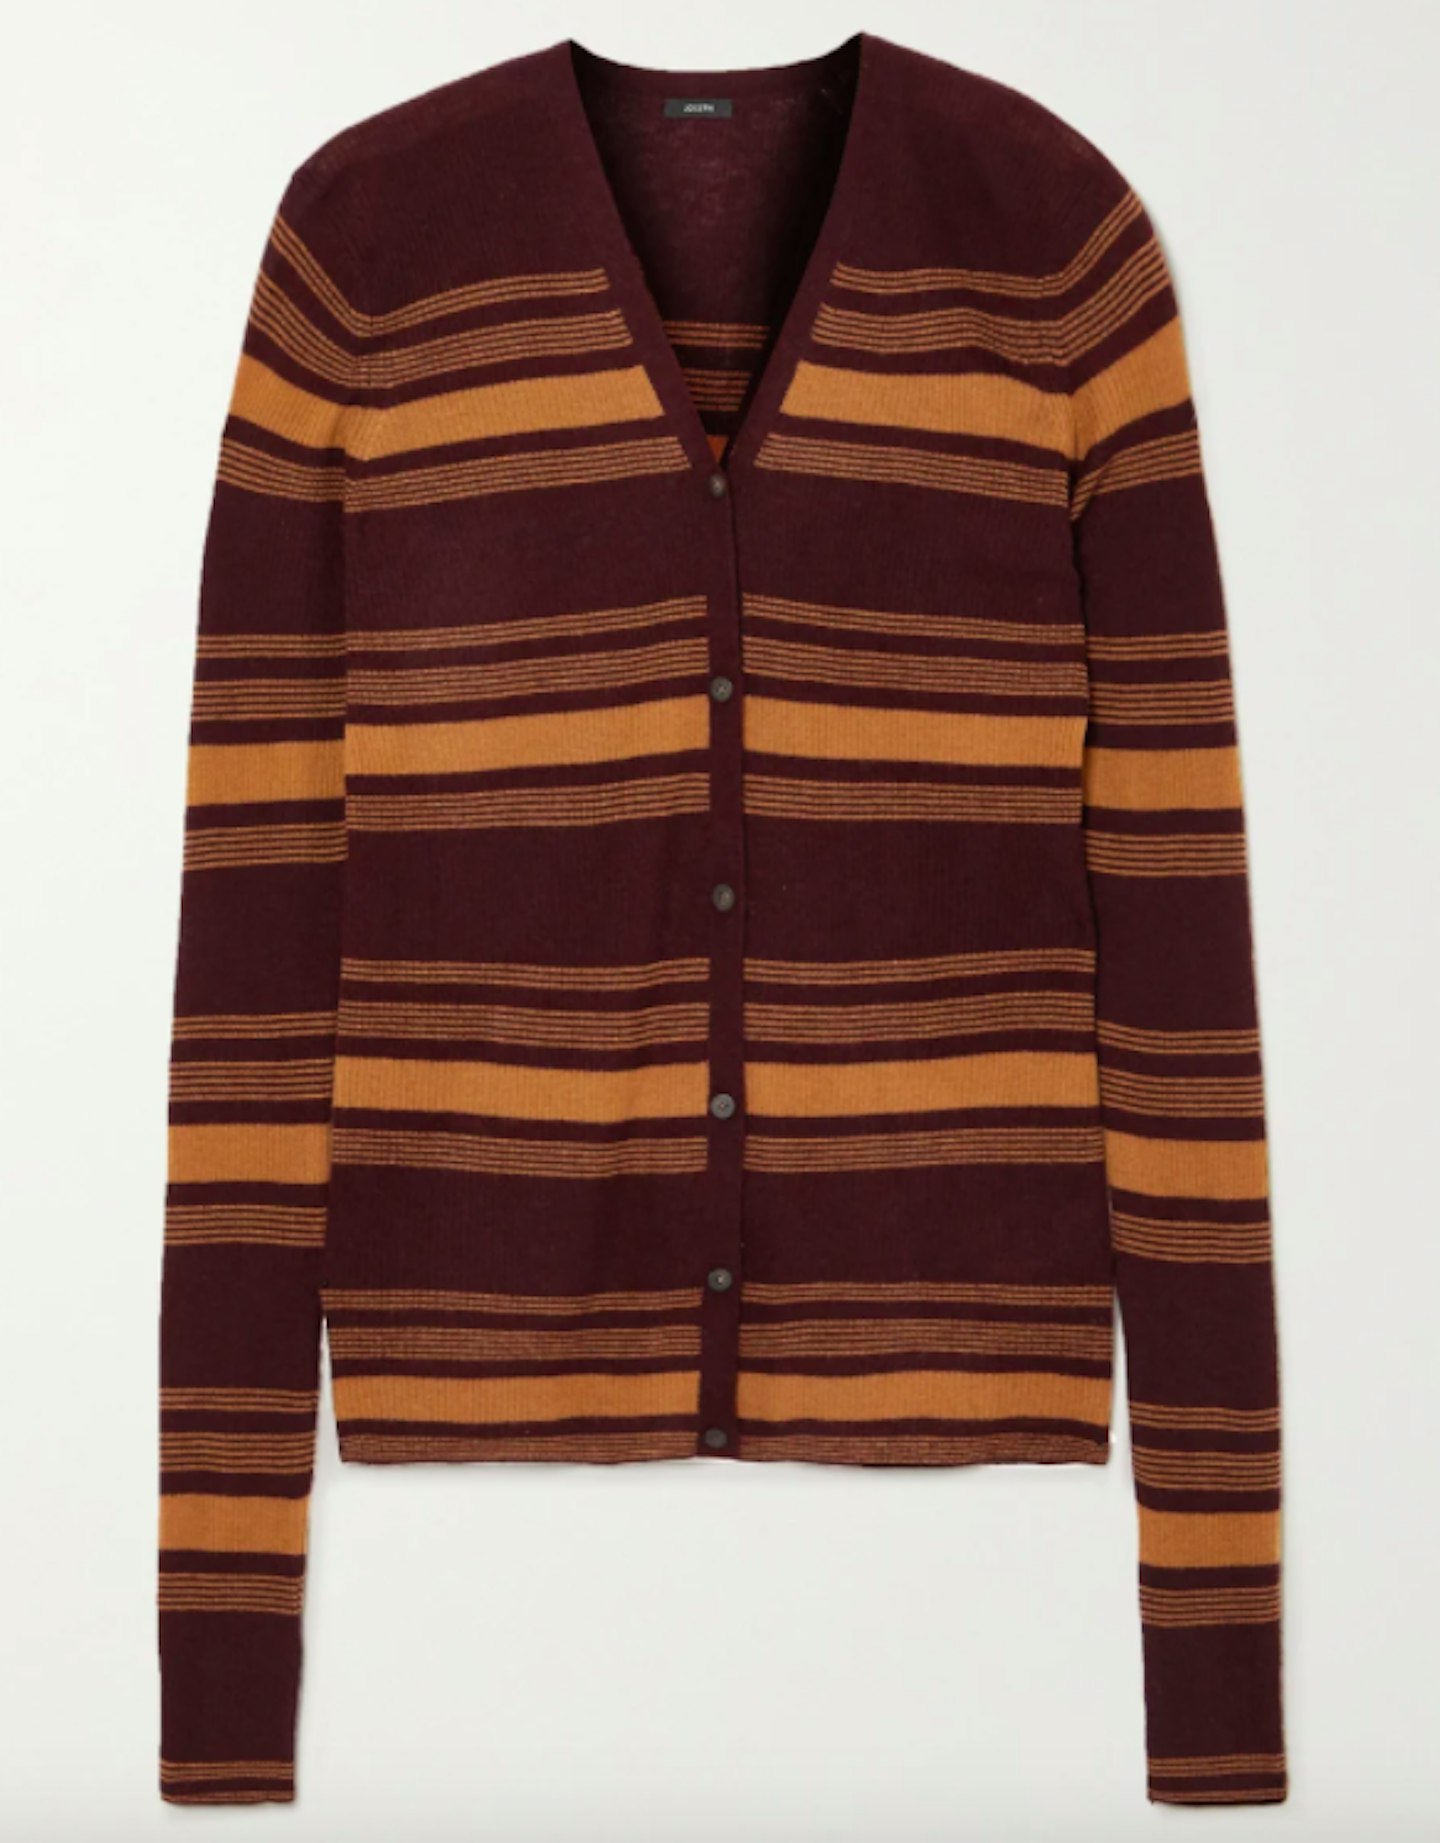 Joseph, Striped Ribbed Cashmere Cardigan, WAS £295 NOW £177